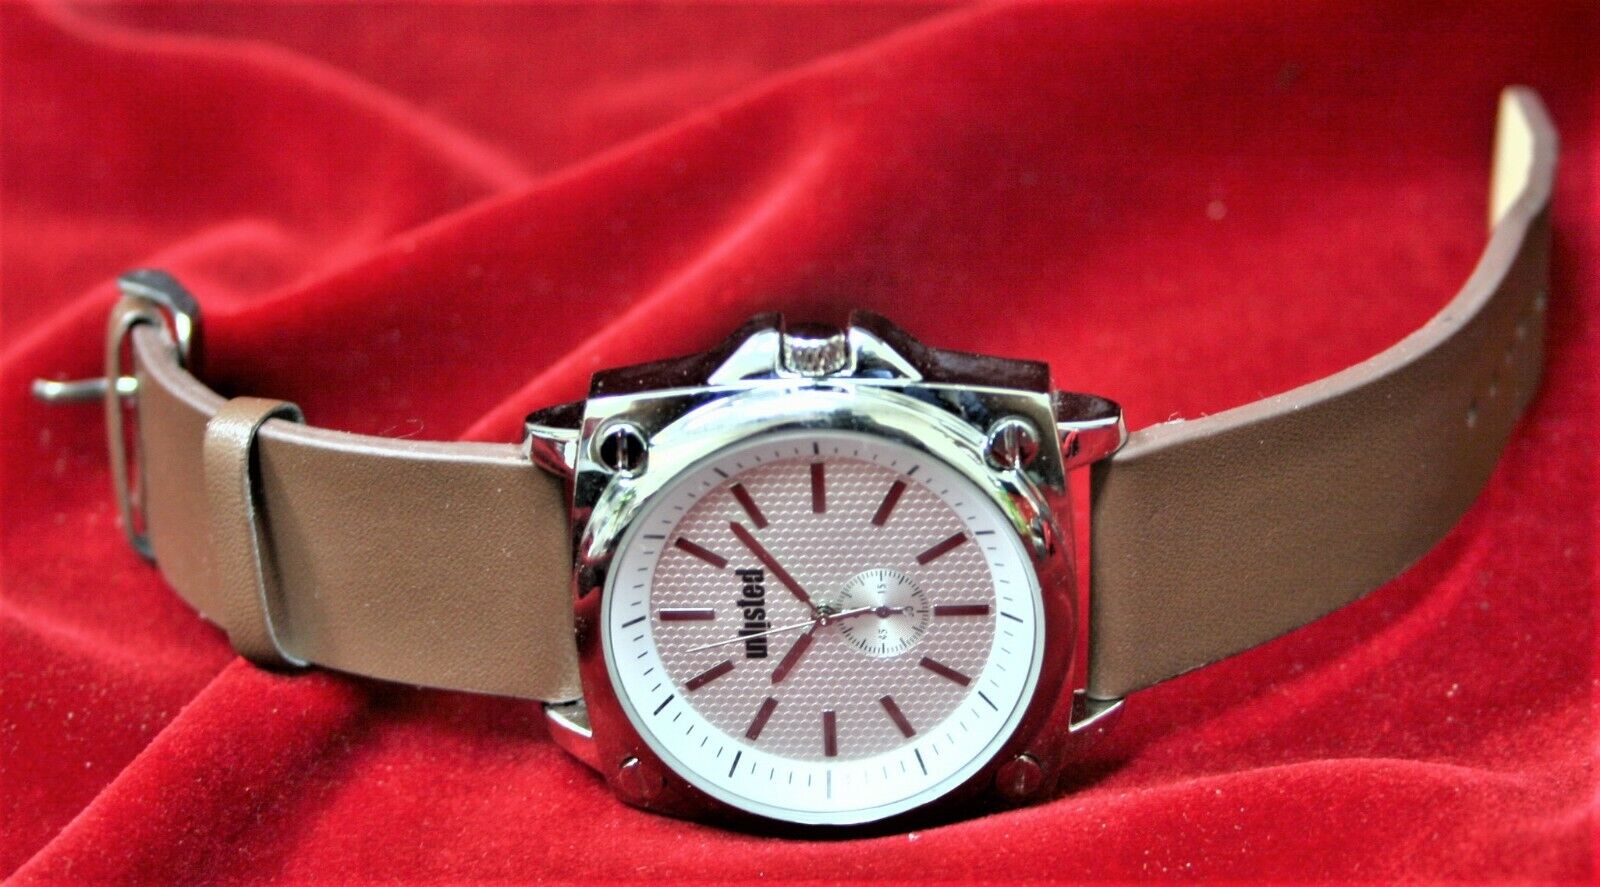 UNLISTED STAINLESS STEEL CASEBACK WRIST WATCH! #10032003 JAPAN MOVEMENT!